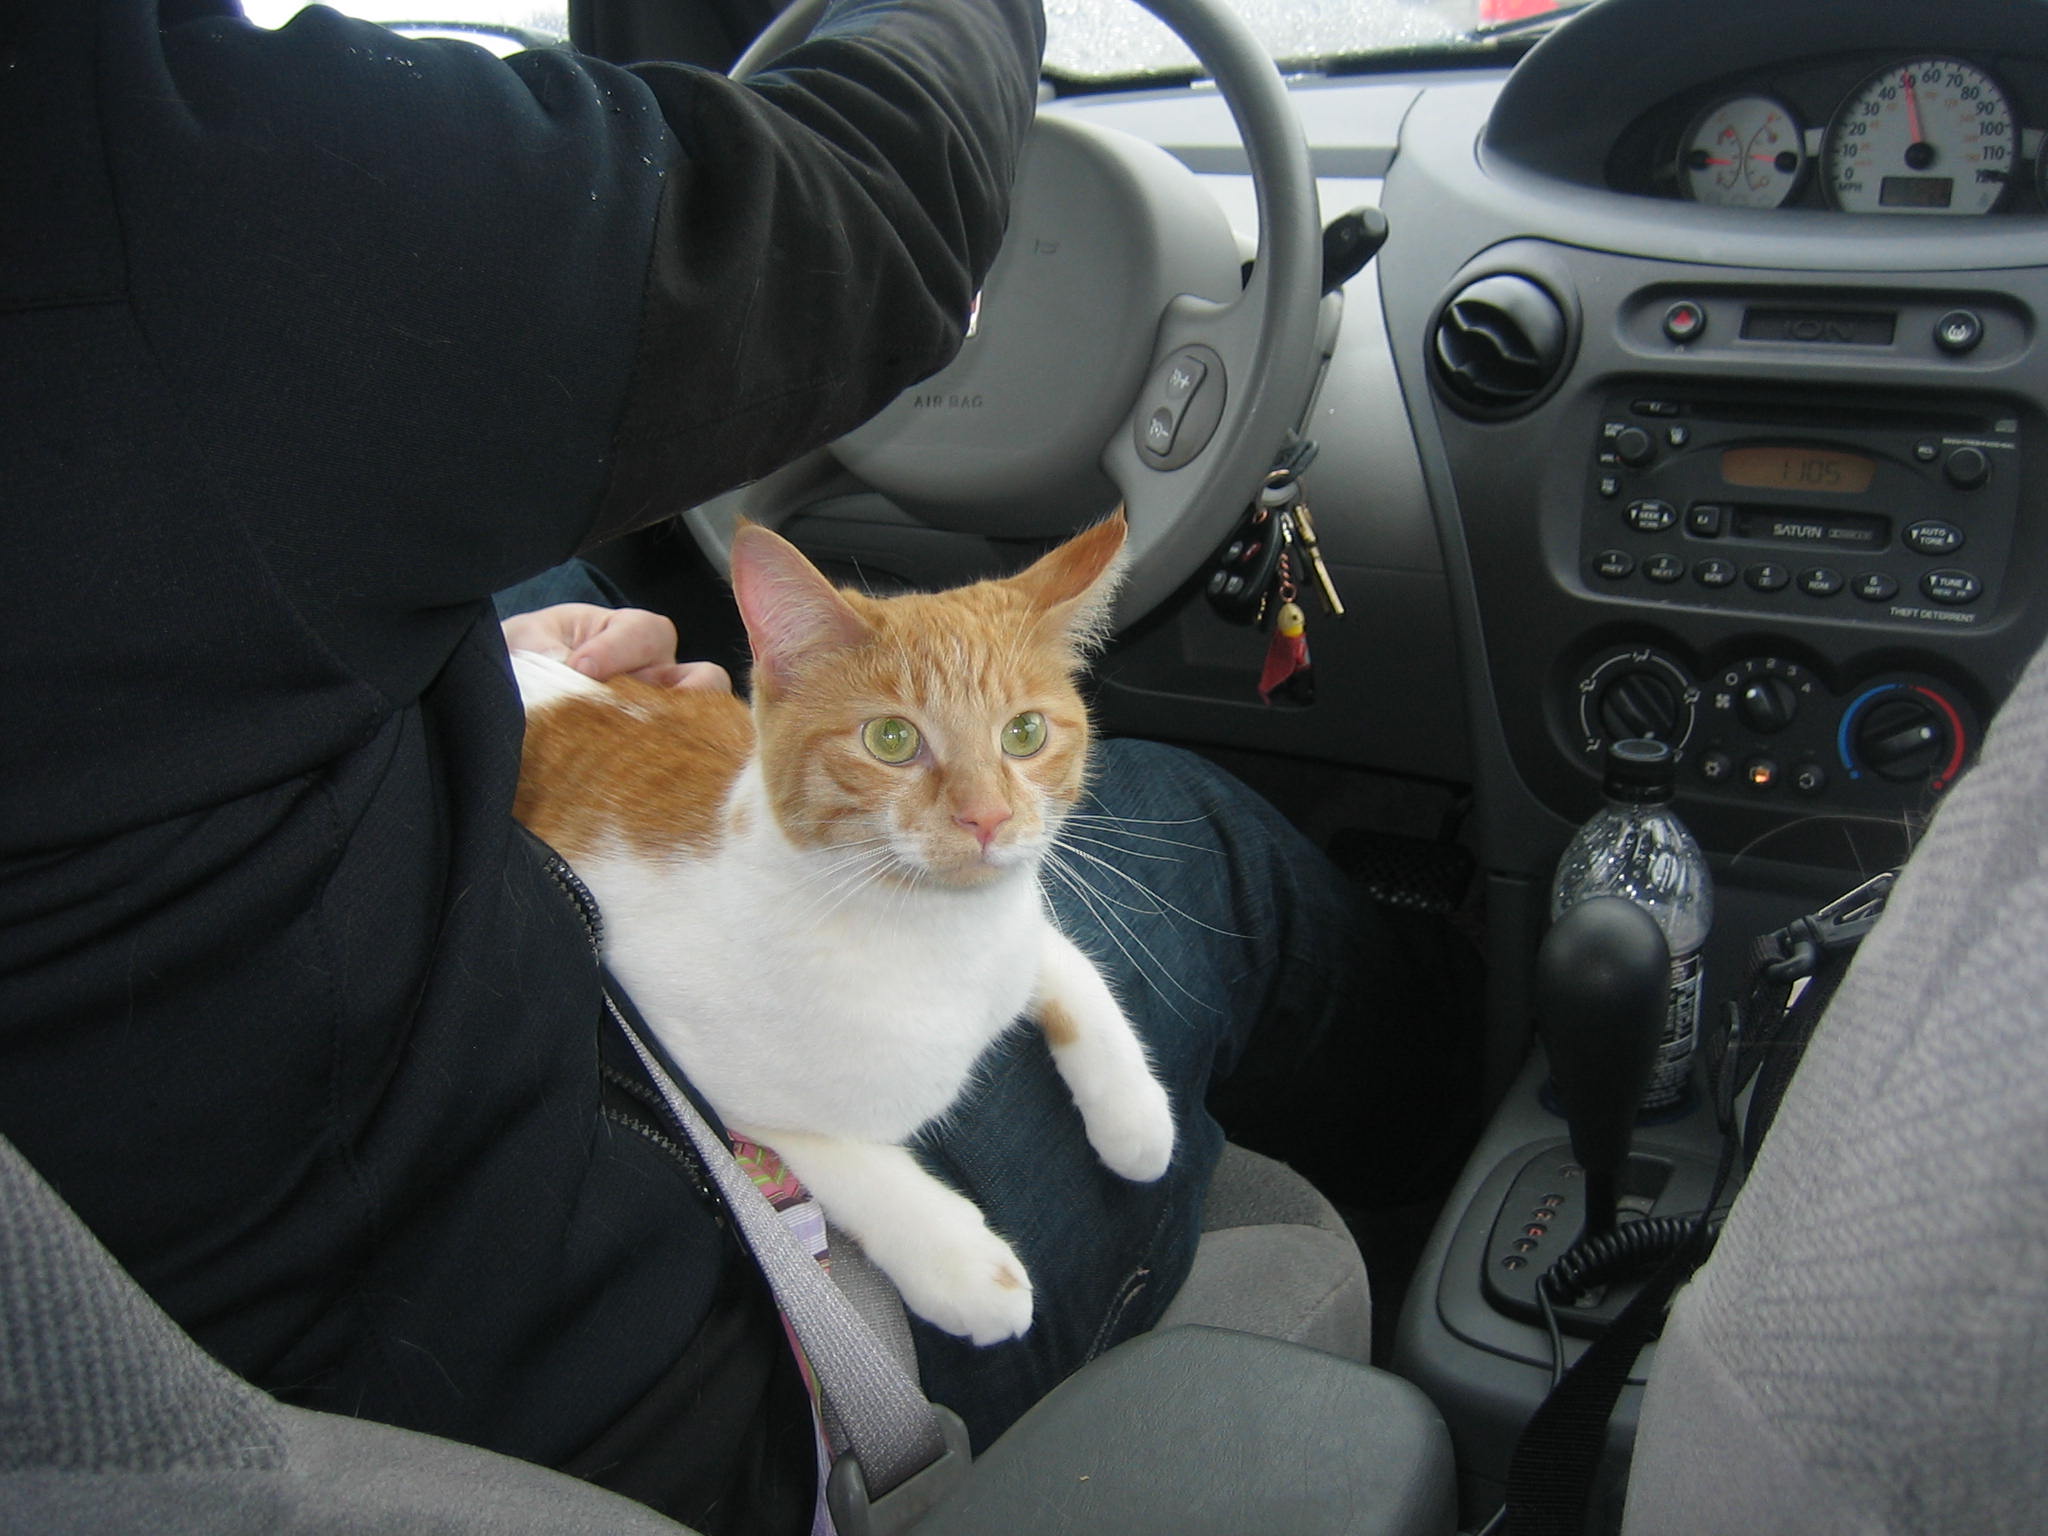 the cat is being held up in the driver's seat